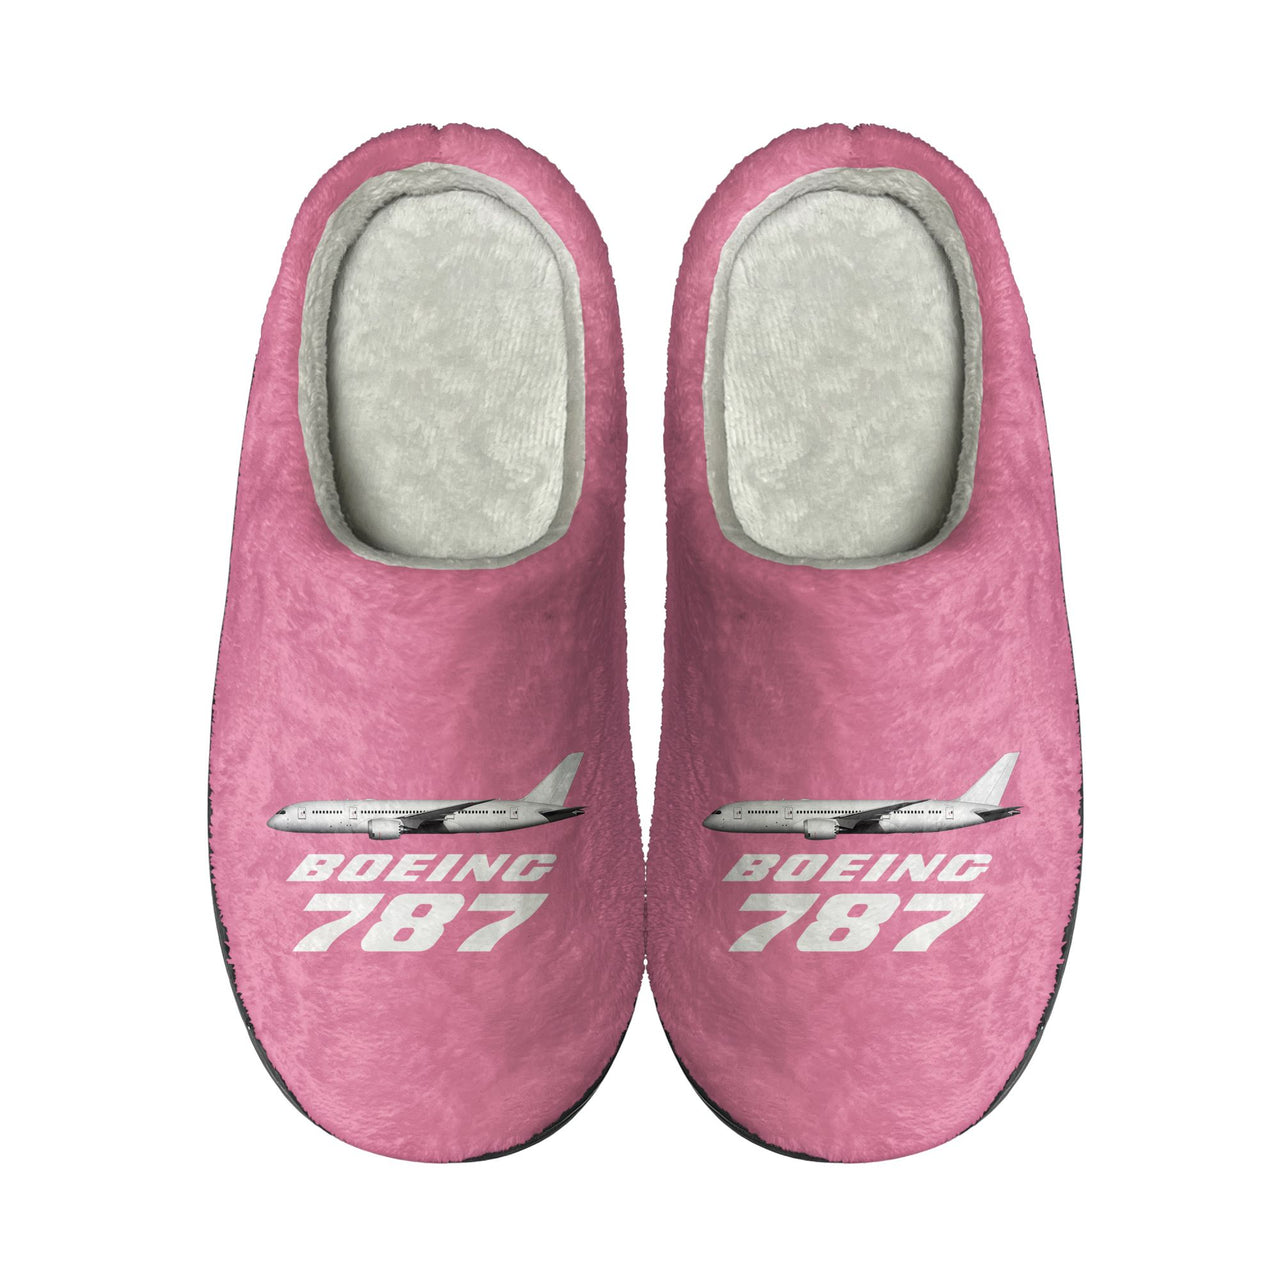 The Boeing 787 Designed Cotton Slippers